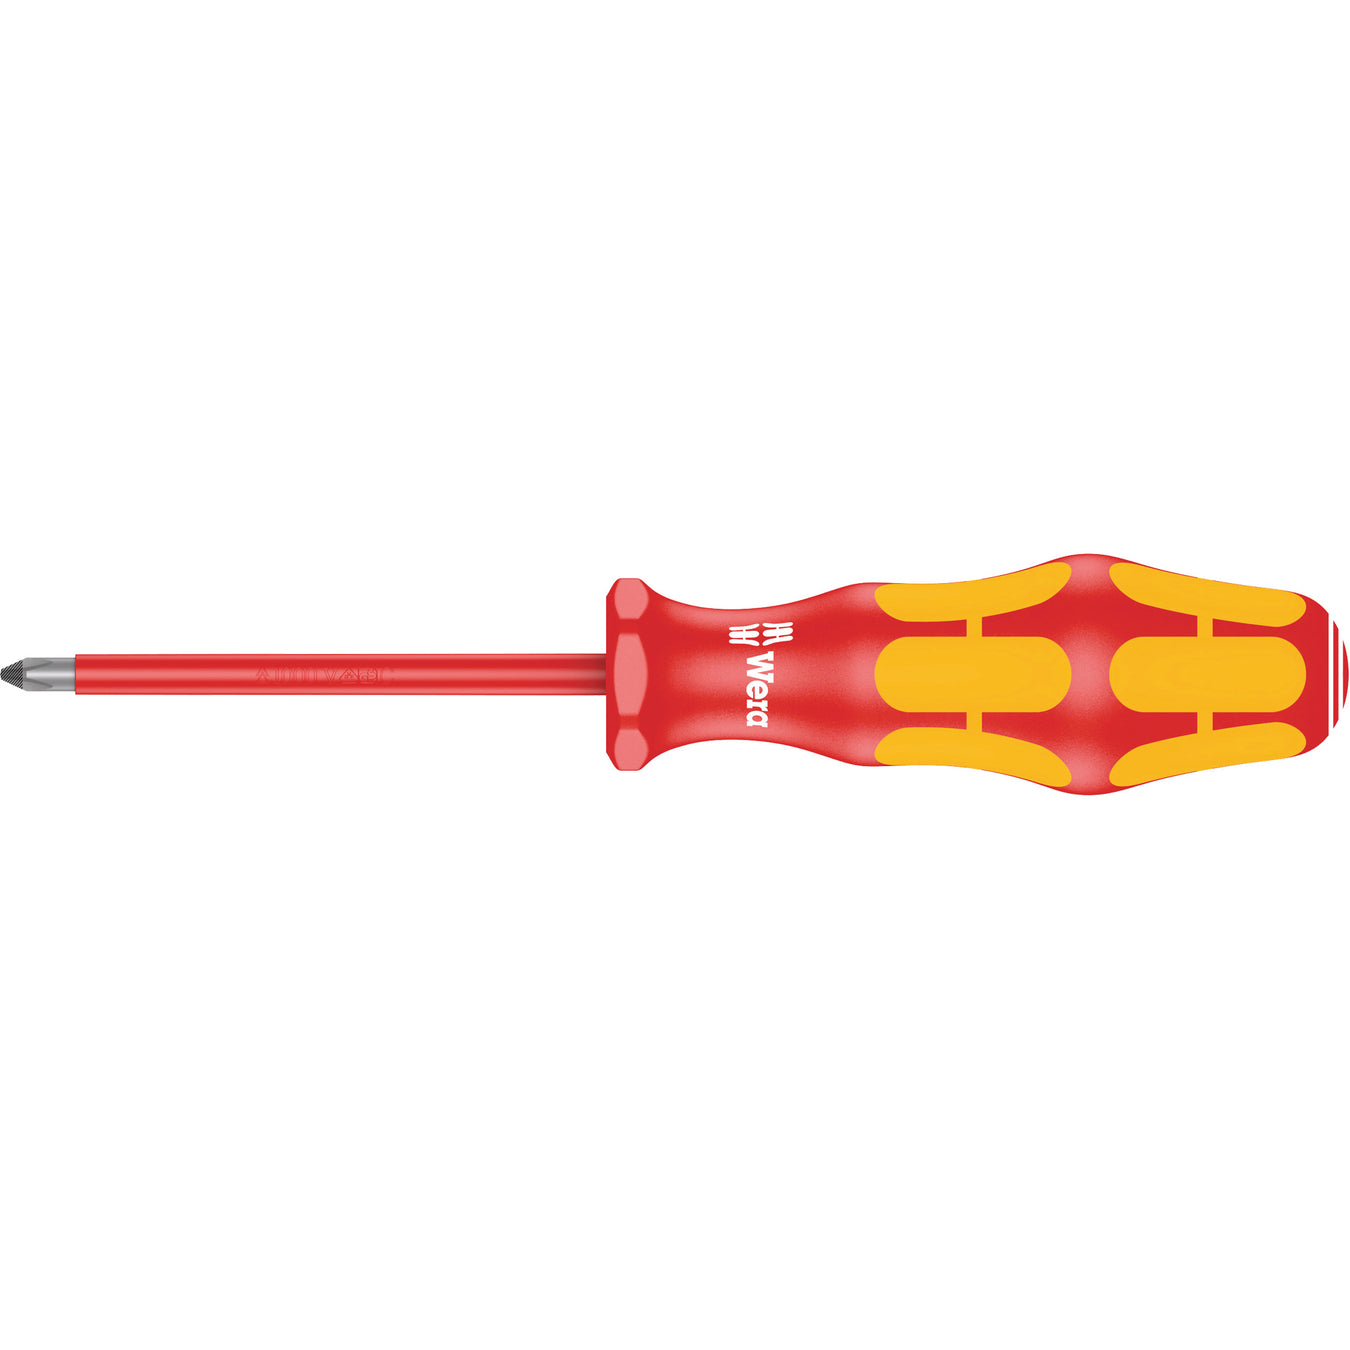 Phillips insulated screwdriver # 1